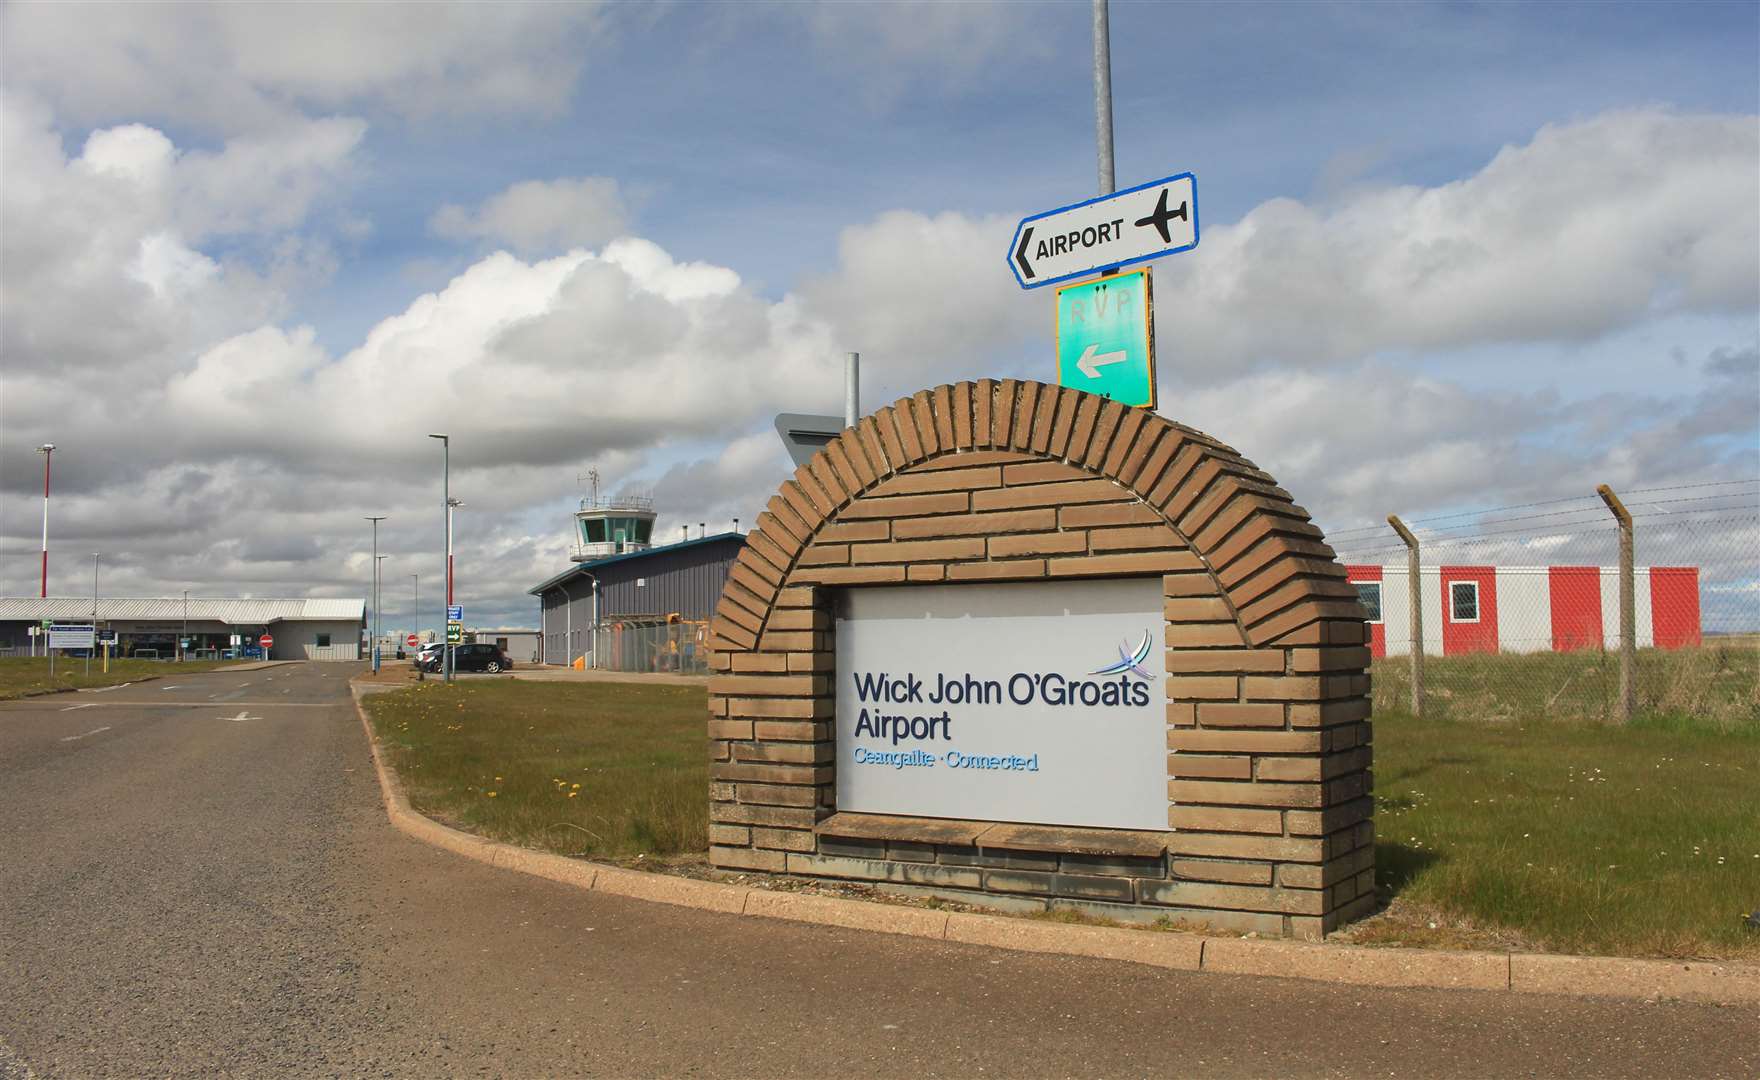 There are concerns that the Air Traffic Management Strategy will downgrade smaller airports such as Wick John O'Groats.